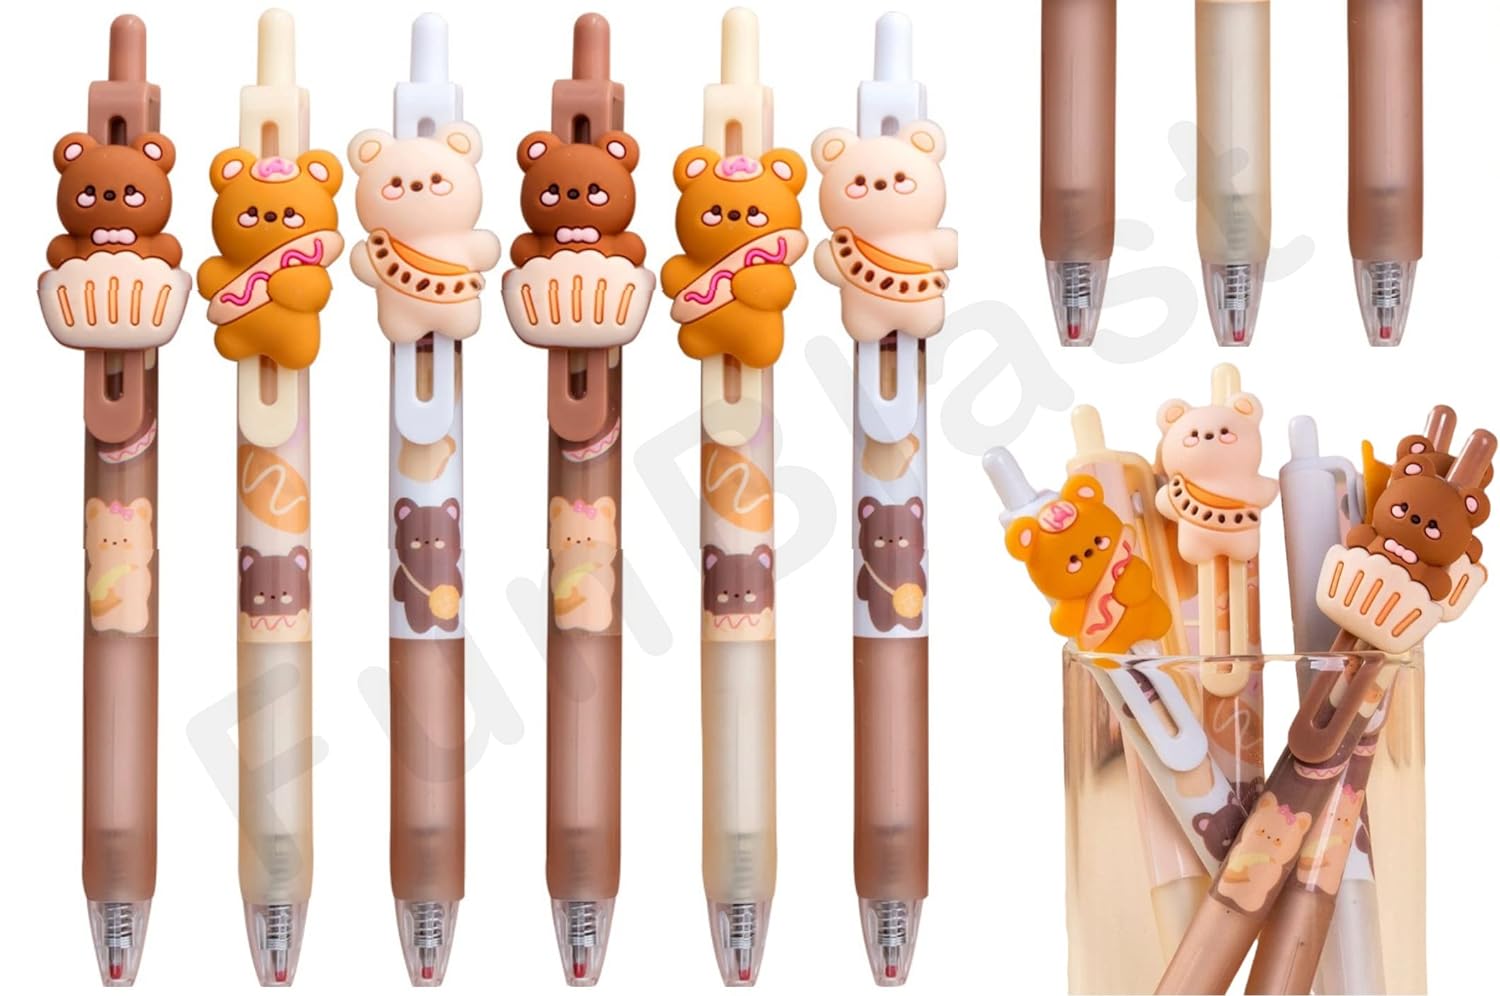 Ball Pens For Writing-Cartoon Design Lightweight Ball Pen With Comfortable Grip For Extra Smooth Writing Pack Of 6)